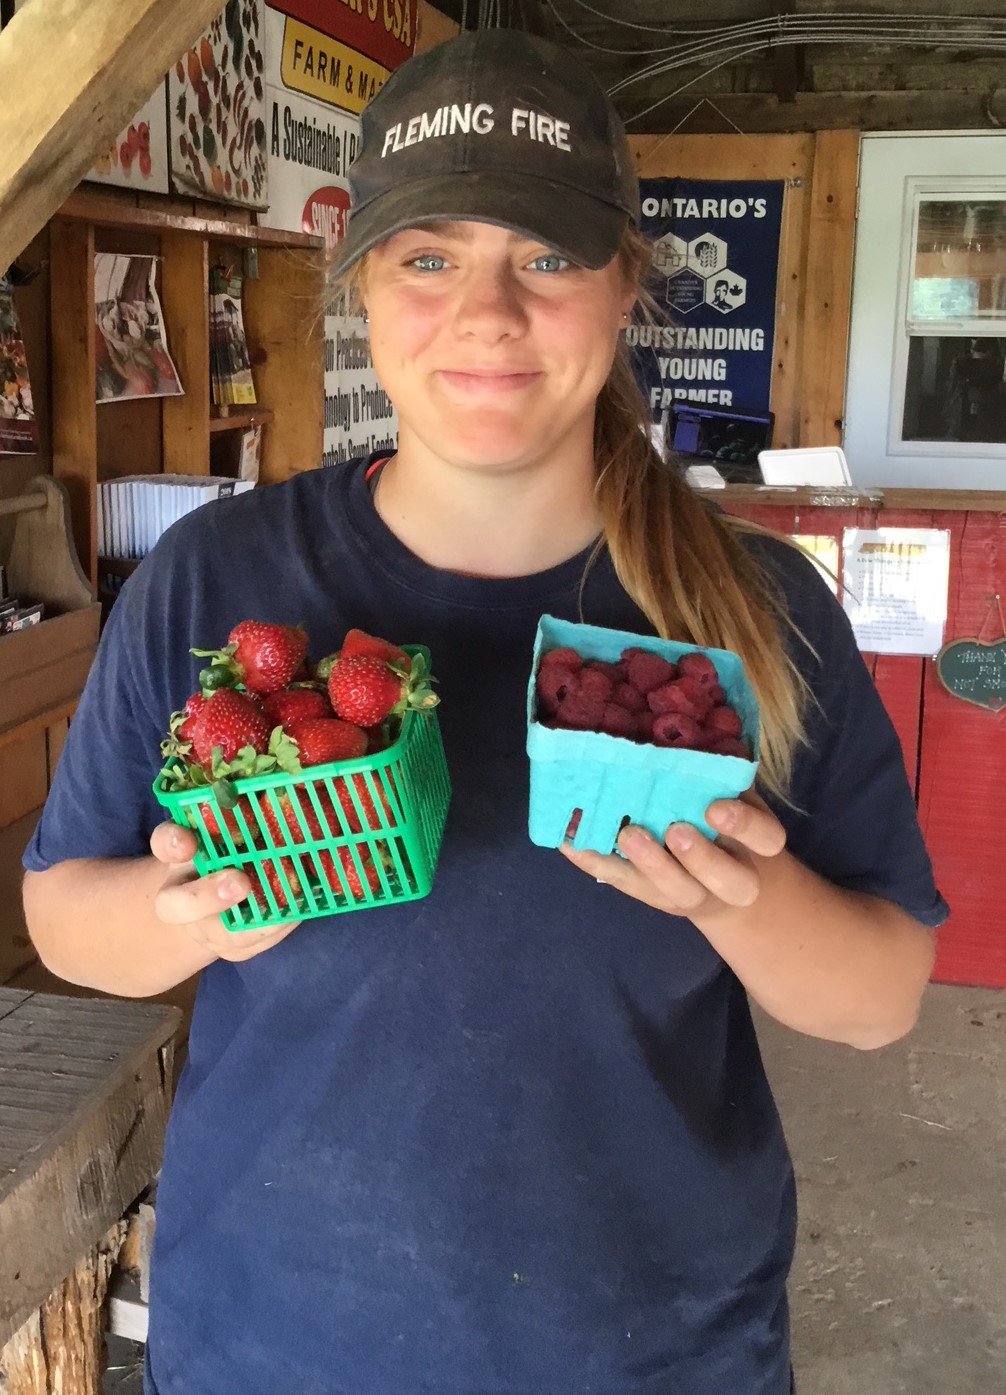 Next Happening: week 9 Aug 7-12 The Farm Box - Strawberries are back!!